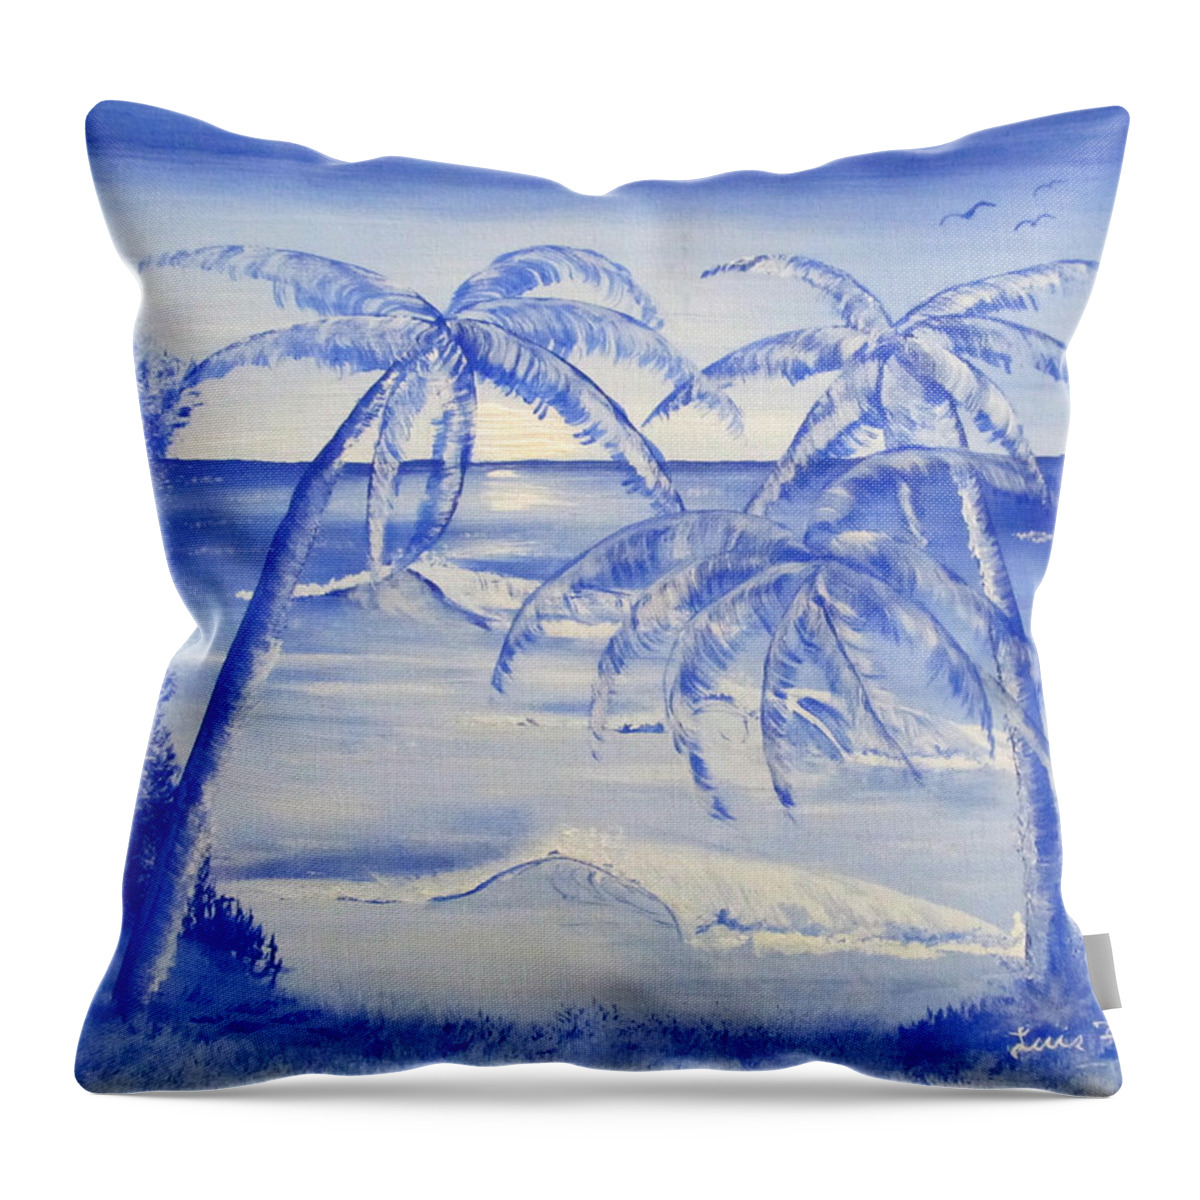 Monochrome Painting Throw Pillow featuring the painting Blue Paradise by Luis F Rodriguez